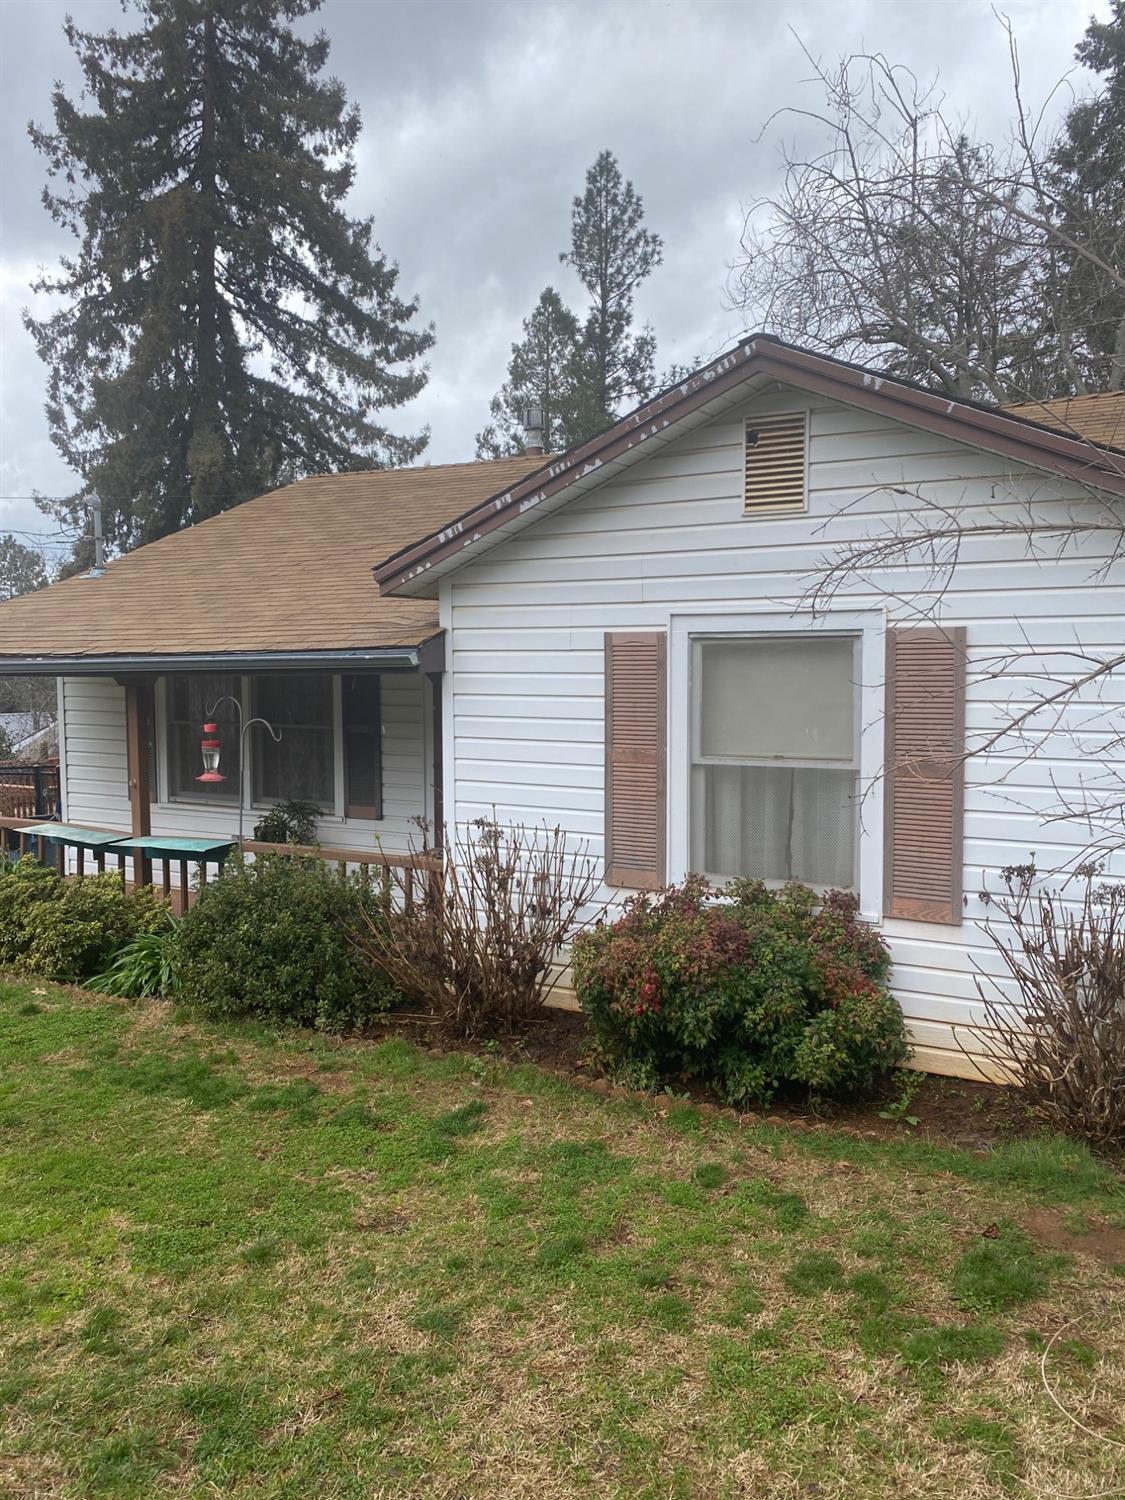 Photo of 24077 Fowler Ave in Colfax, CA